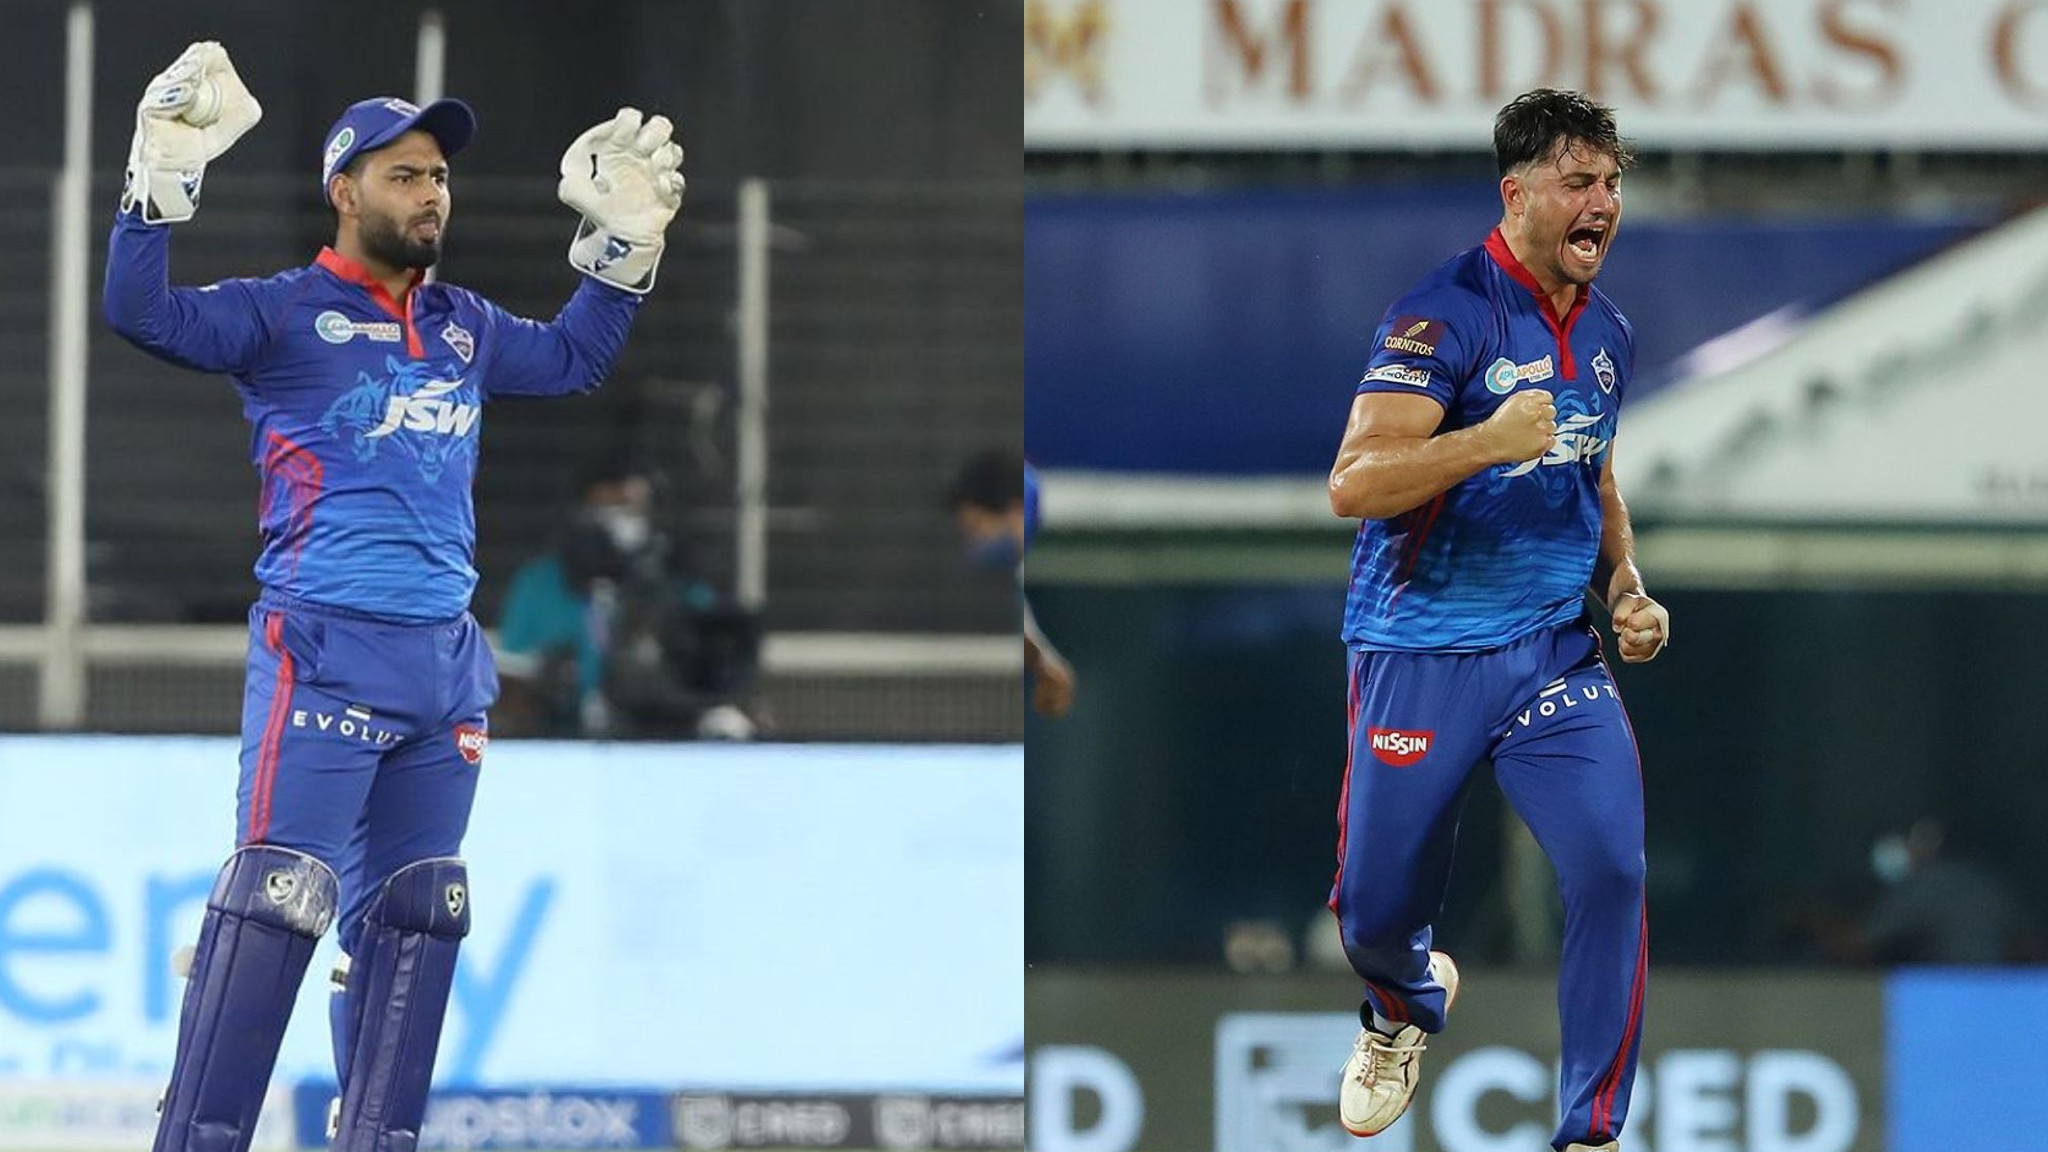 IPL 2021: Rishabh Pant reveals why Marcus Stoinis bowled the last over against RCB